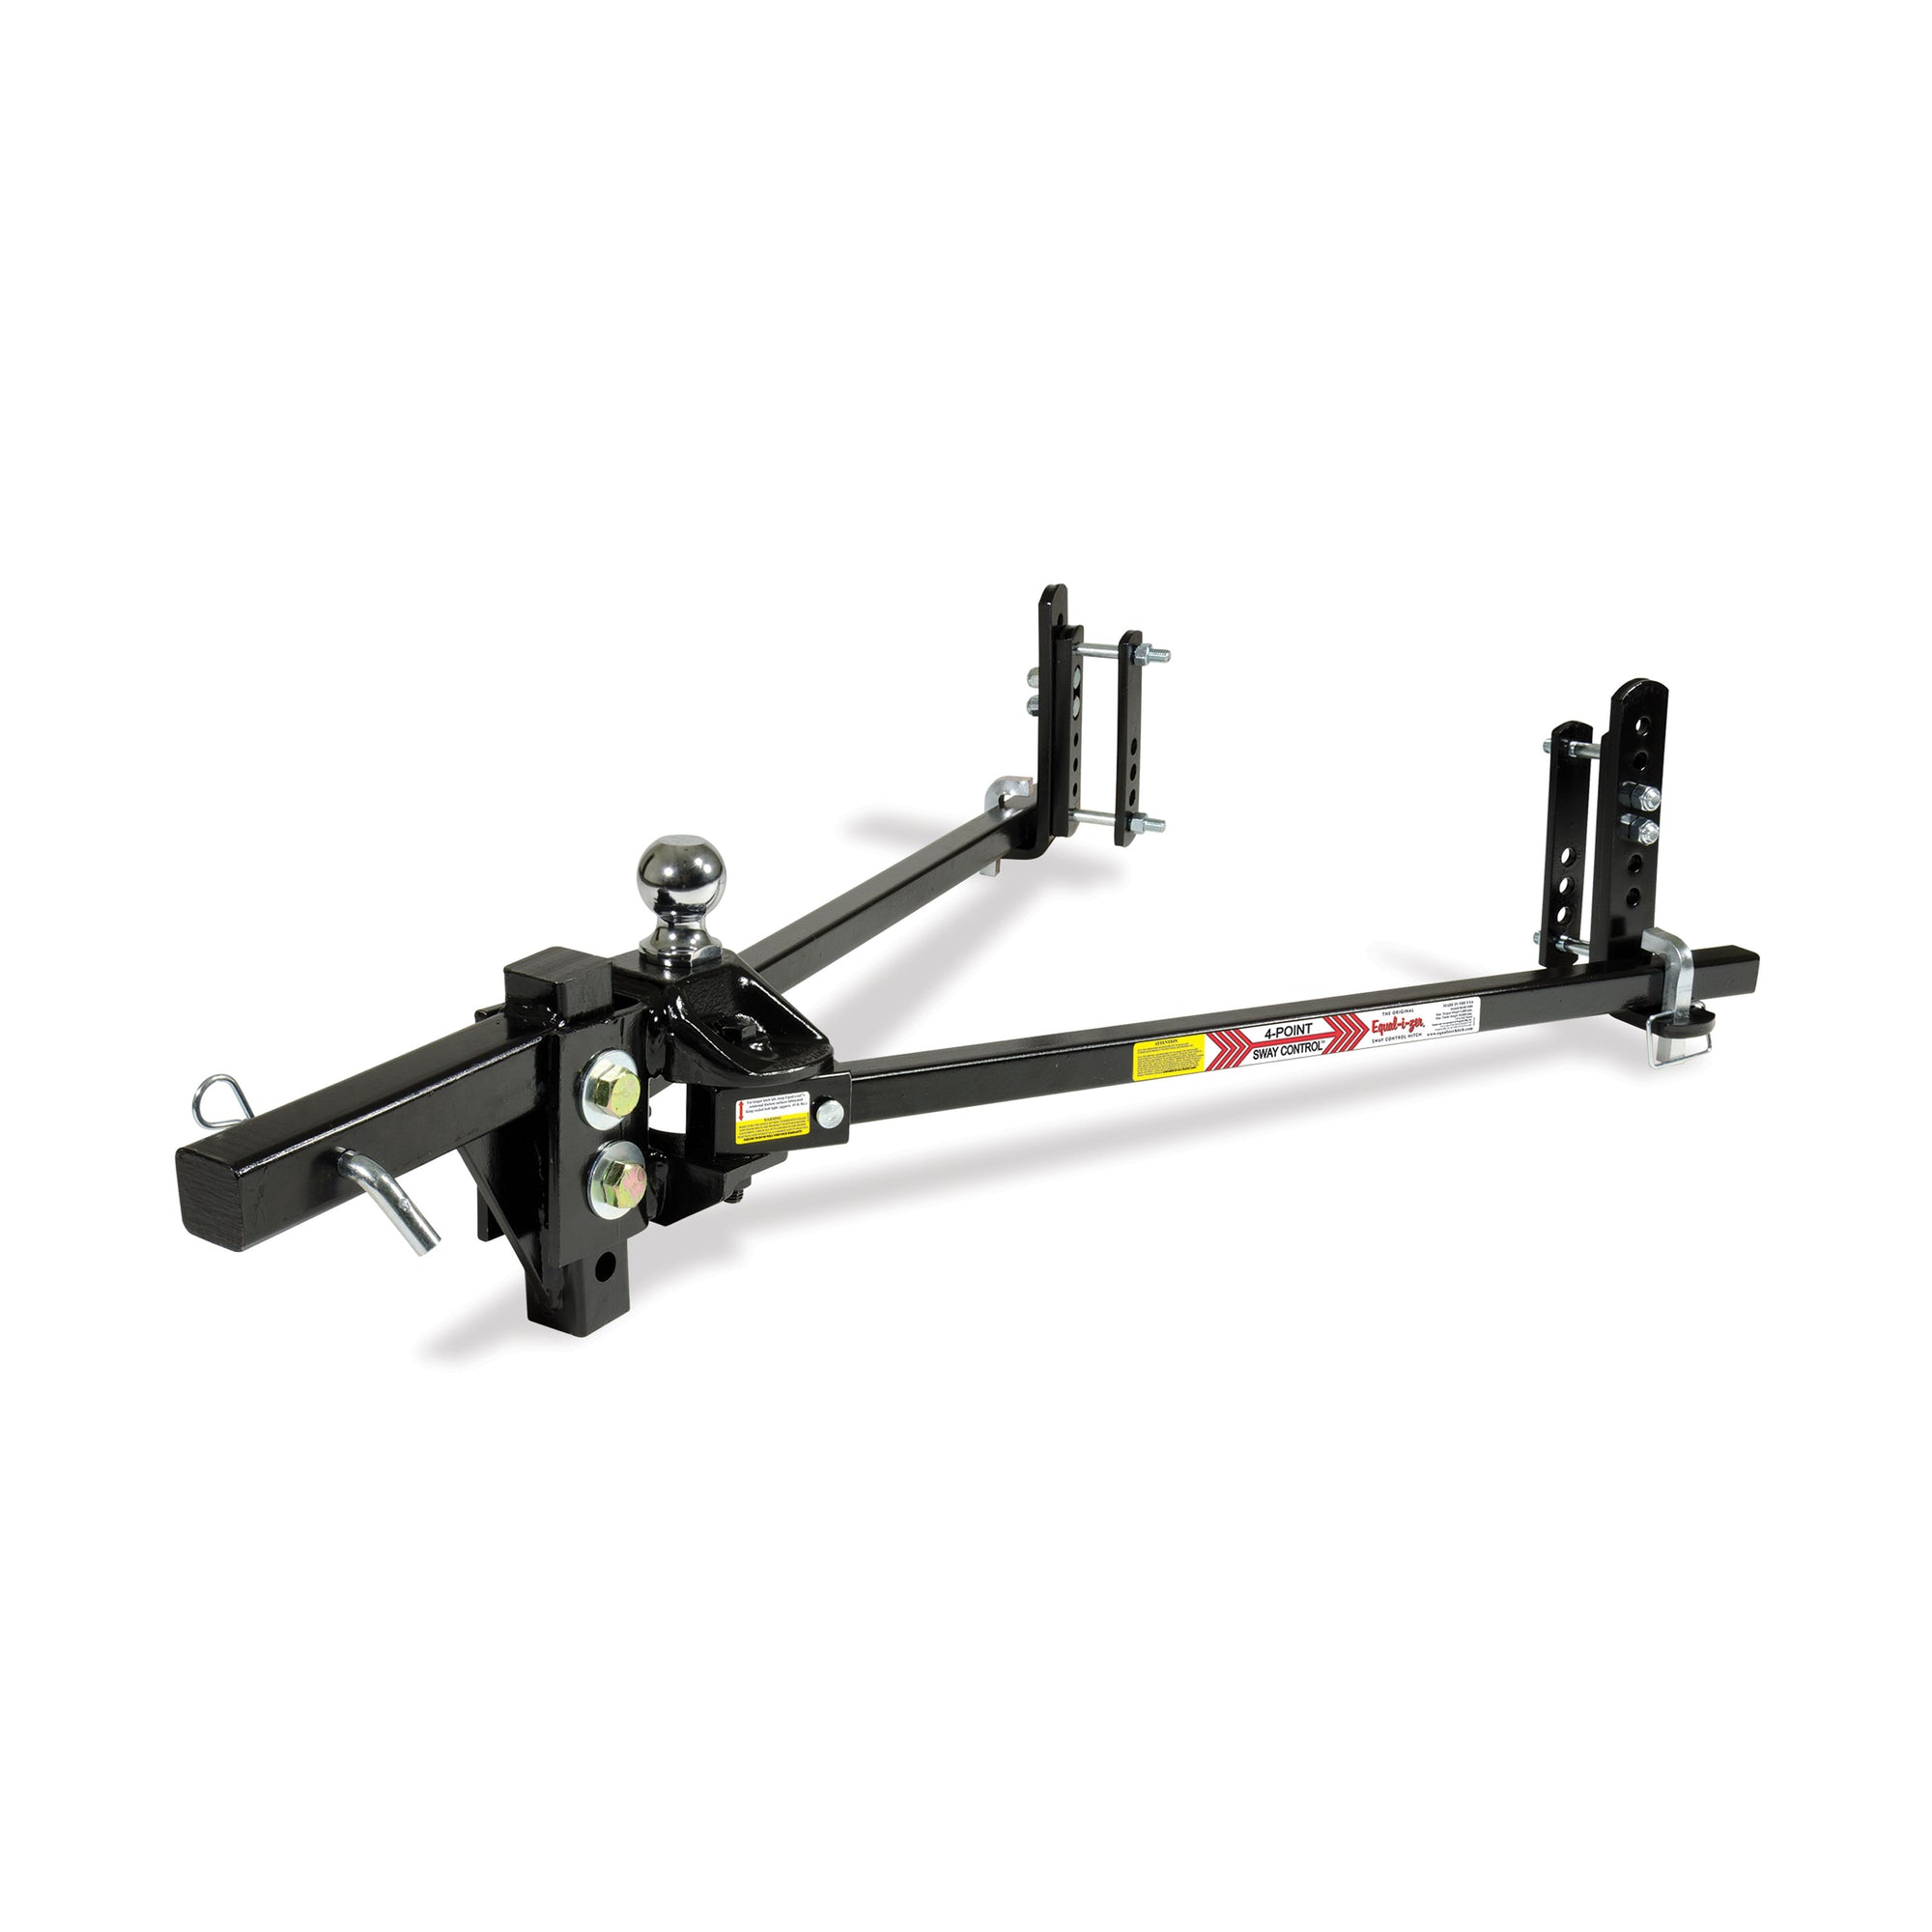 Equal-i-zer 90-00-1069 Sway Control Hitch with Pre-Installed Hitch Ball - 1,000 lbs. TW/10,000 GTW